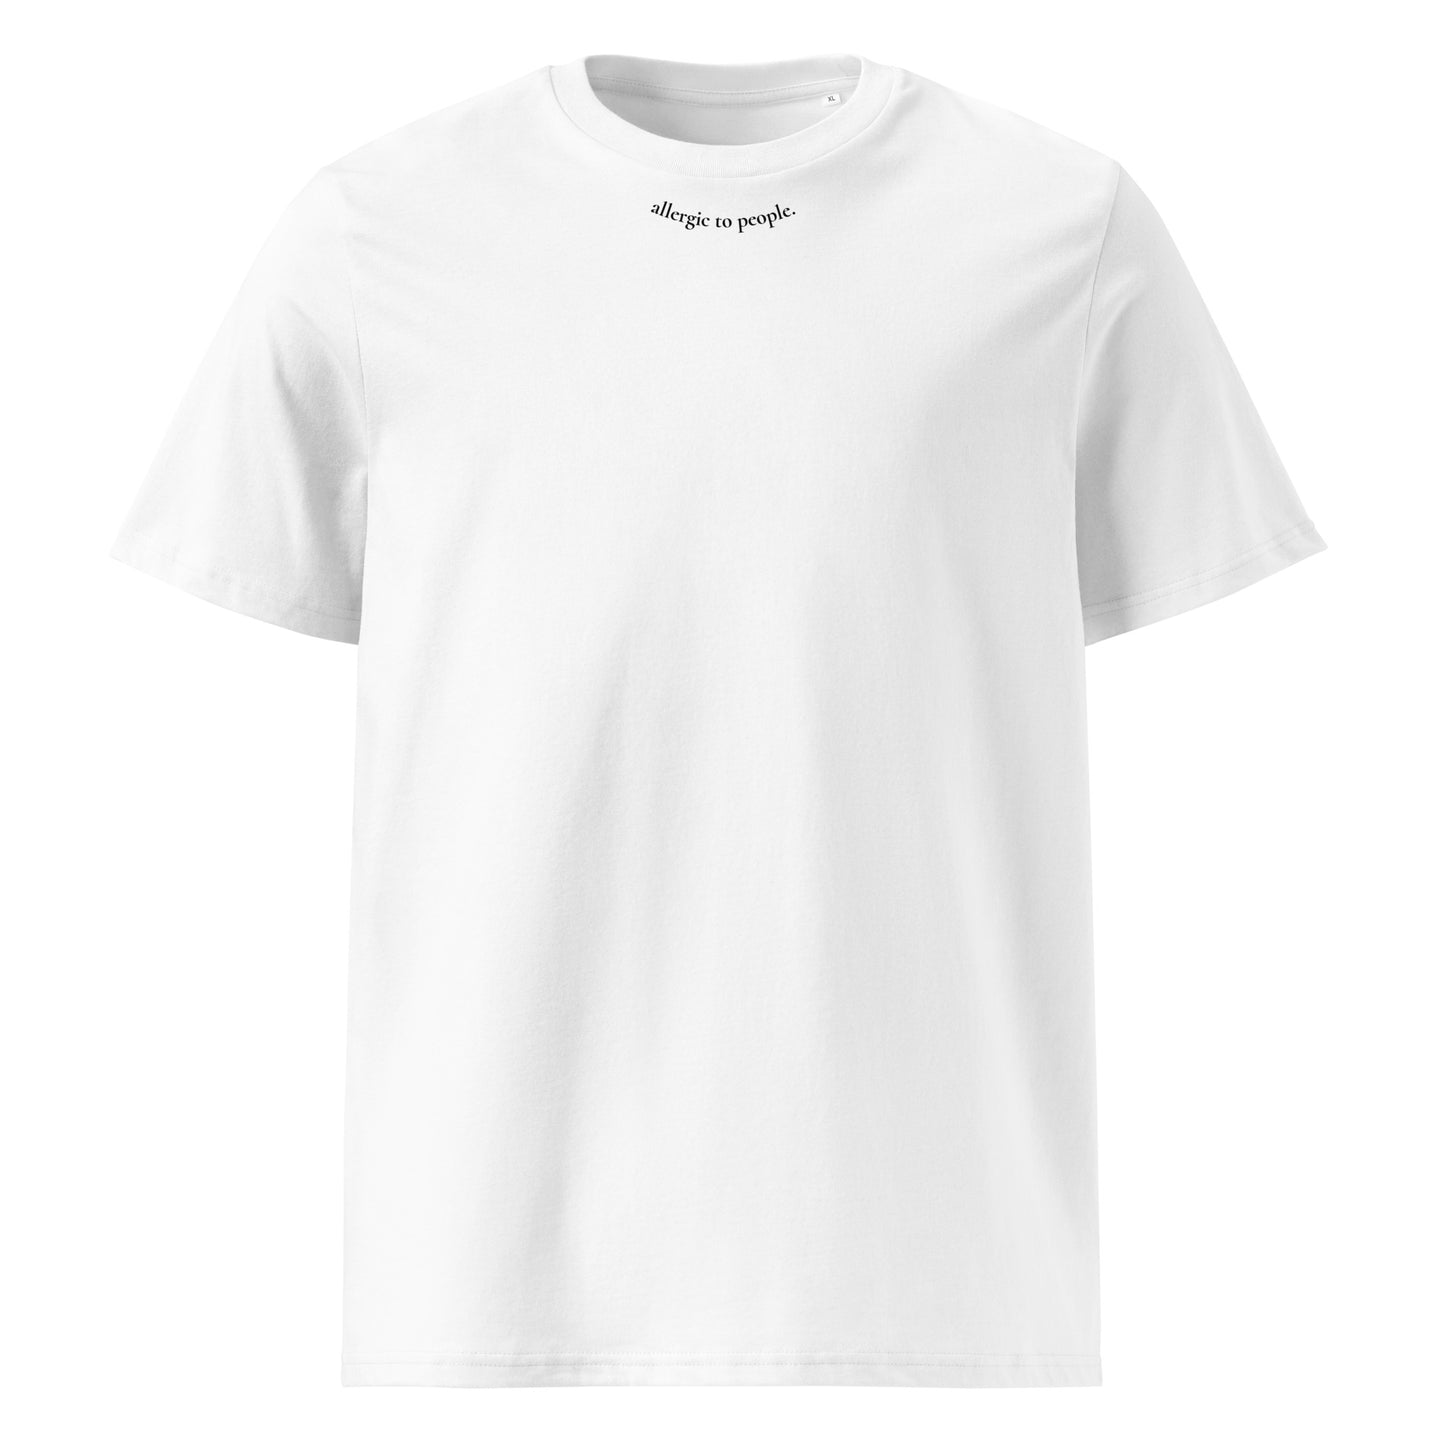 sueed. organic cotton t-shirt - allergic to people.